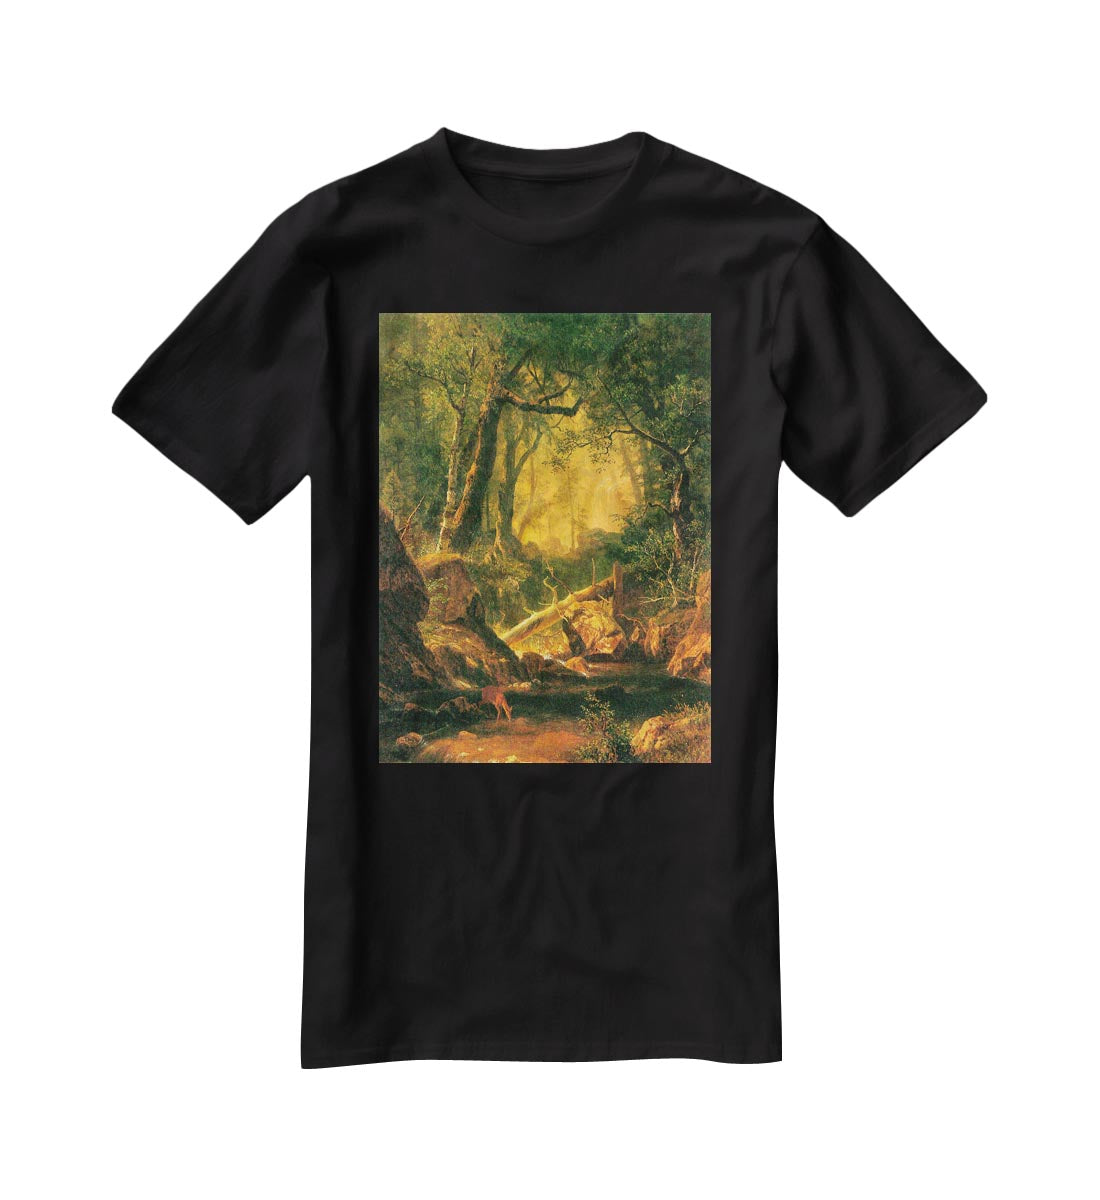 White Mountains New Hampshire 2 by Bierstadt T-Shirt - Canvas Art Rocks - 1